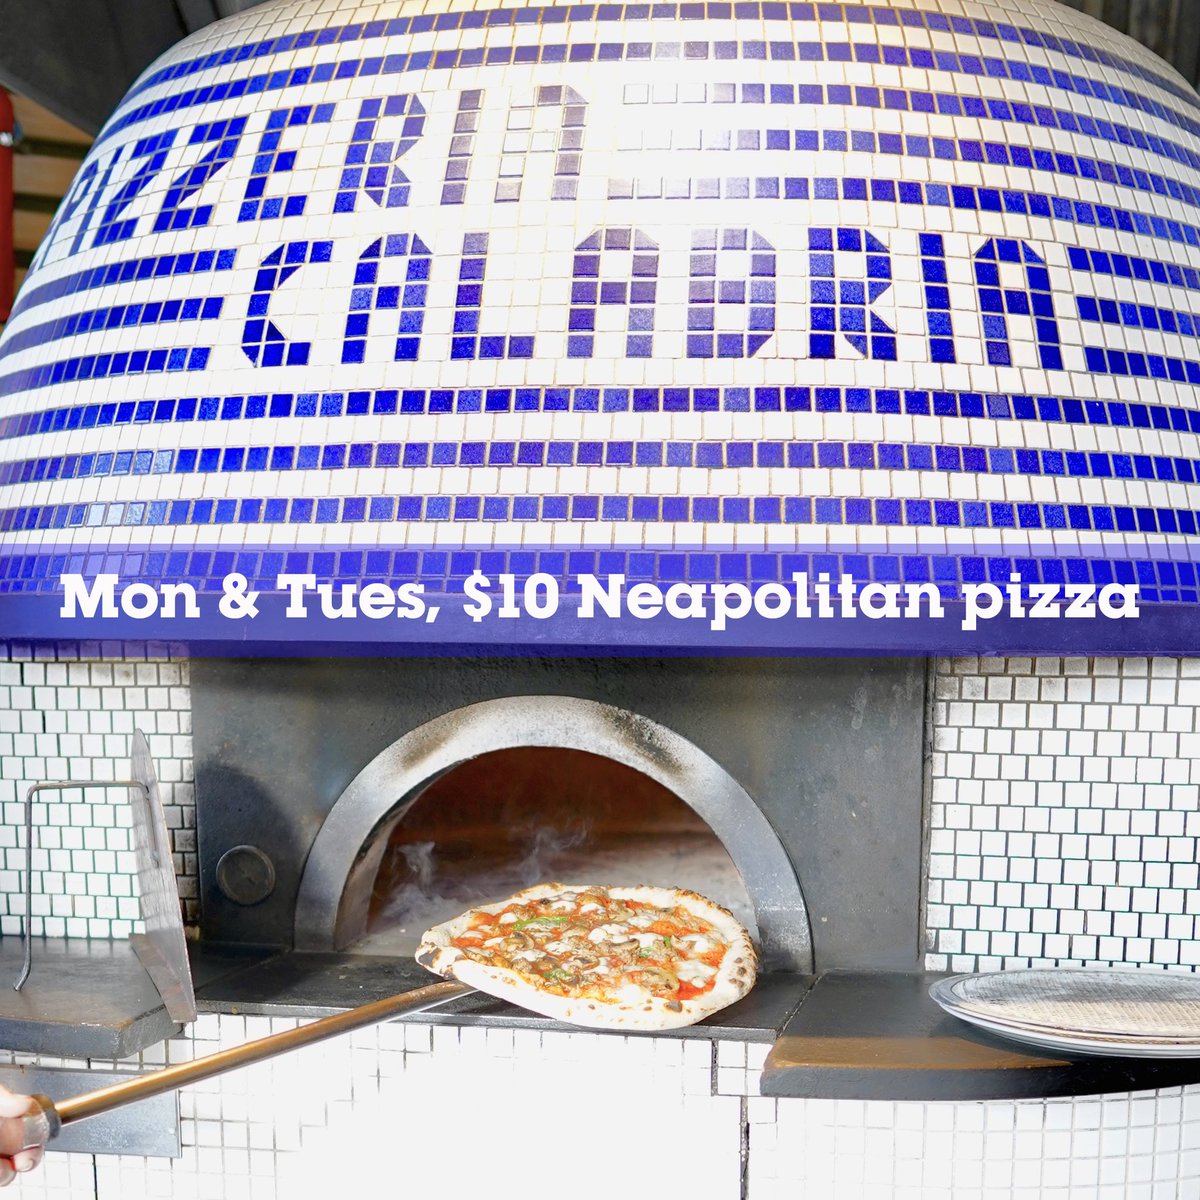 Mondays and Tuesdays, Neapolitan pizza is $10 at @CaffeCalabria. ❤️🇮🇹🍕